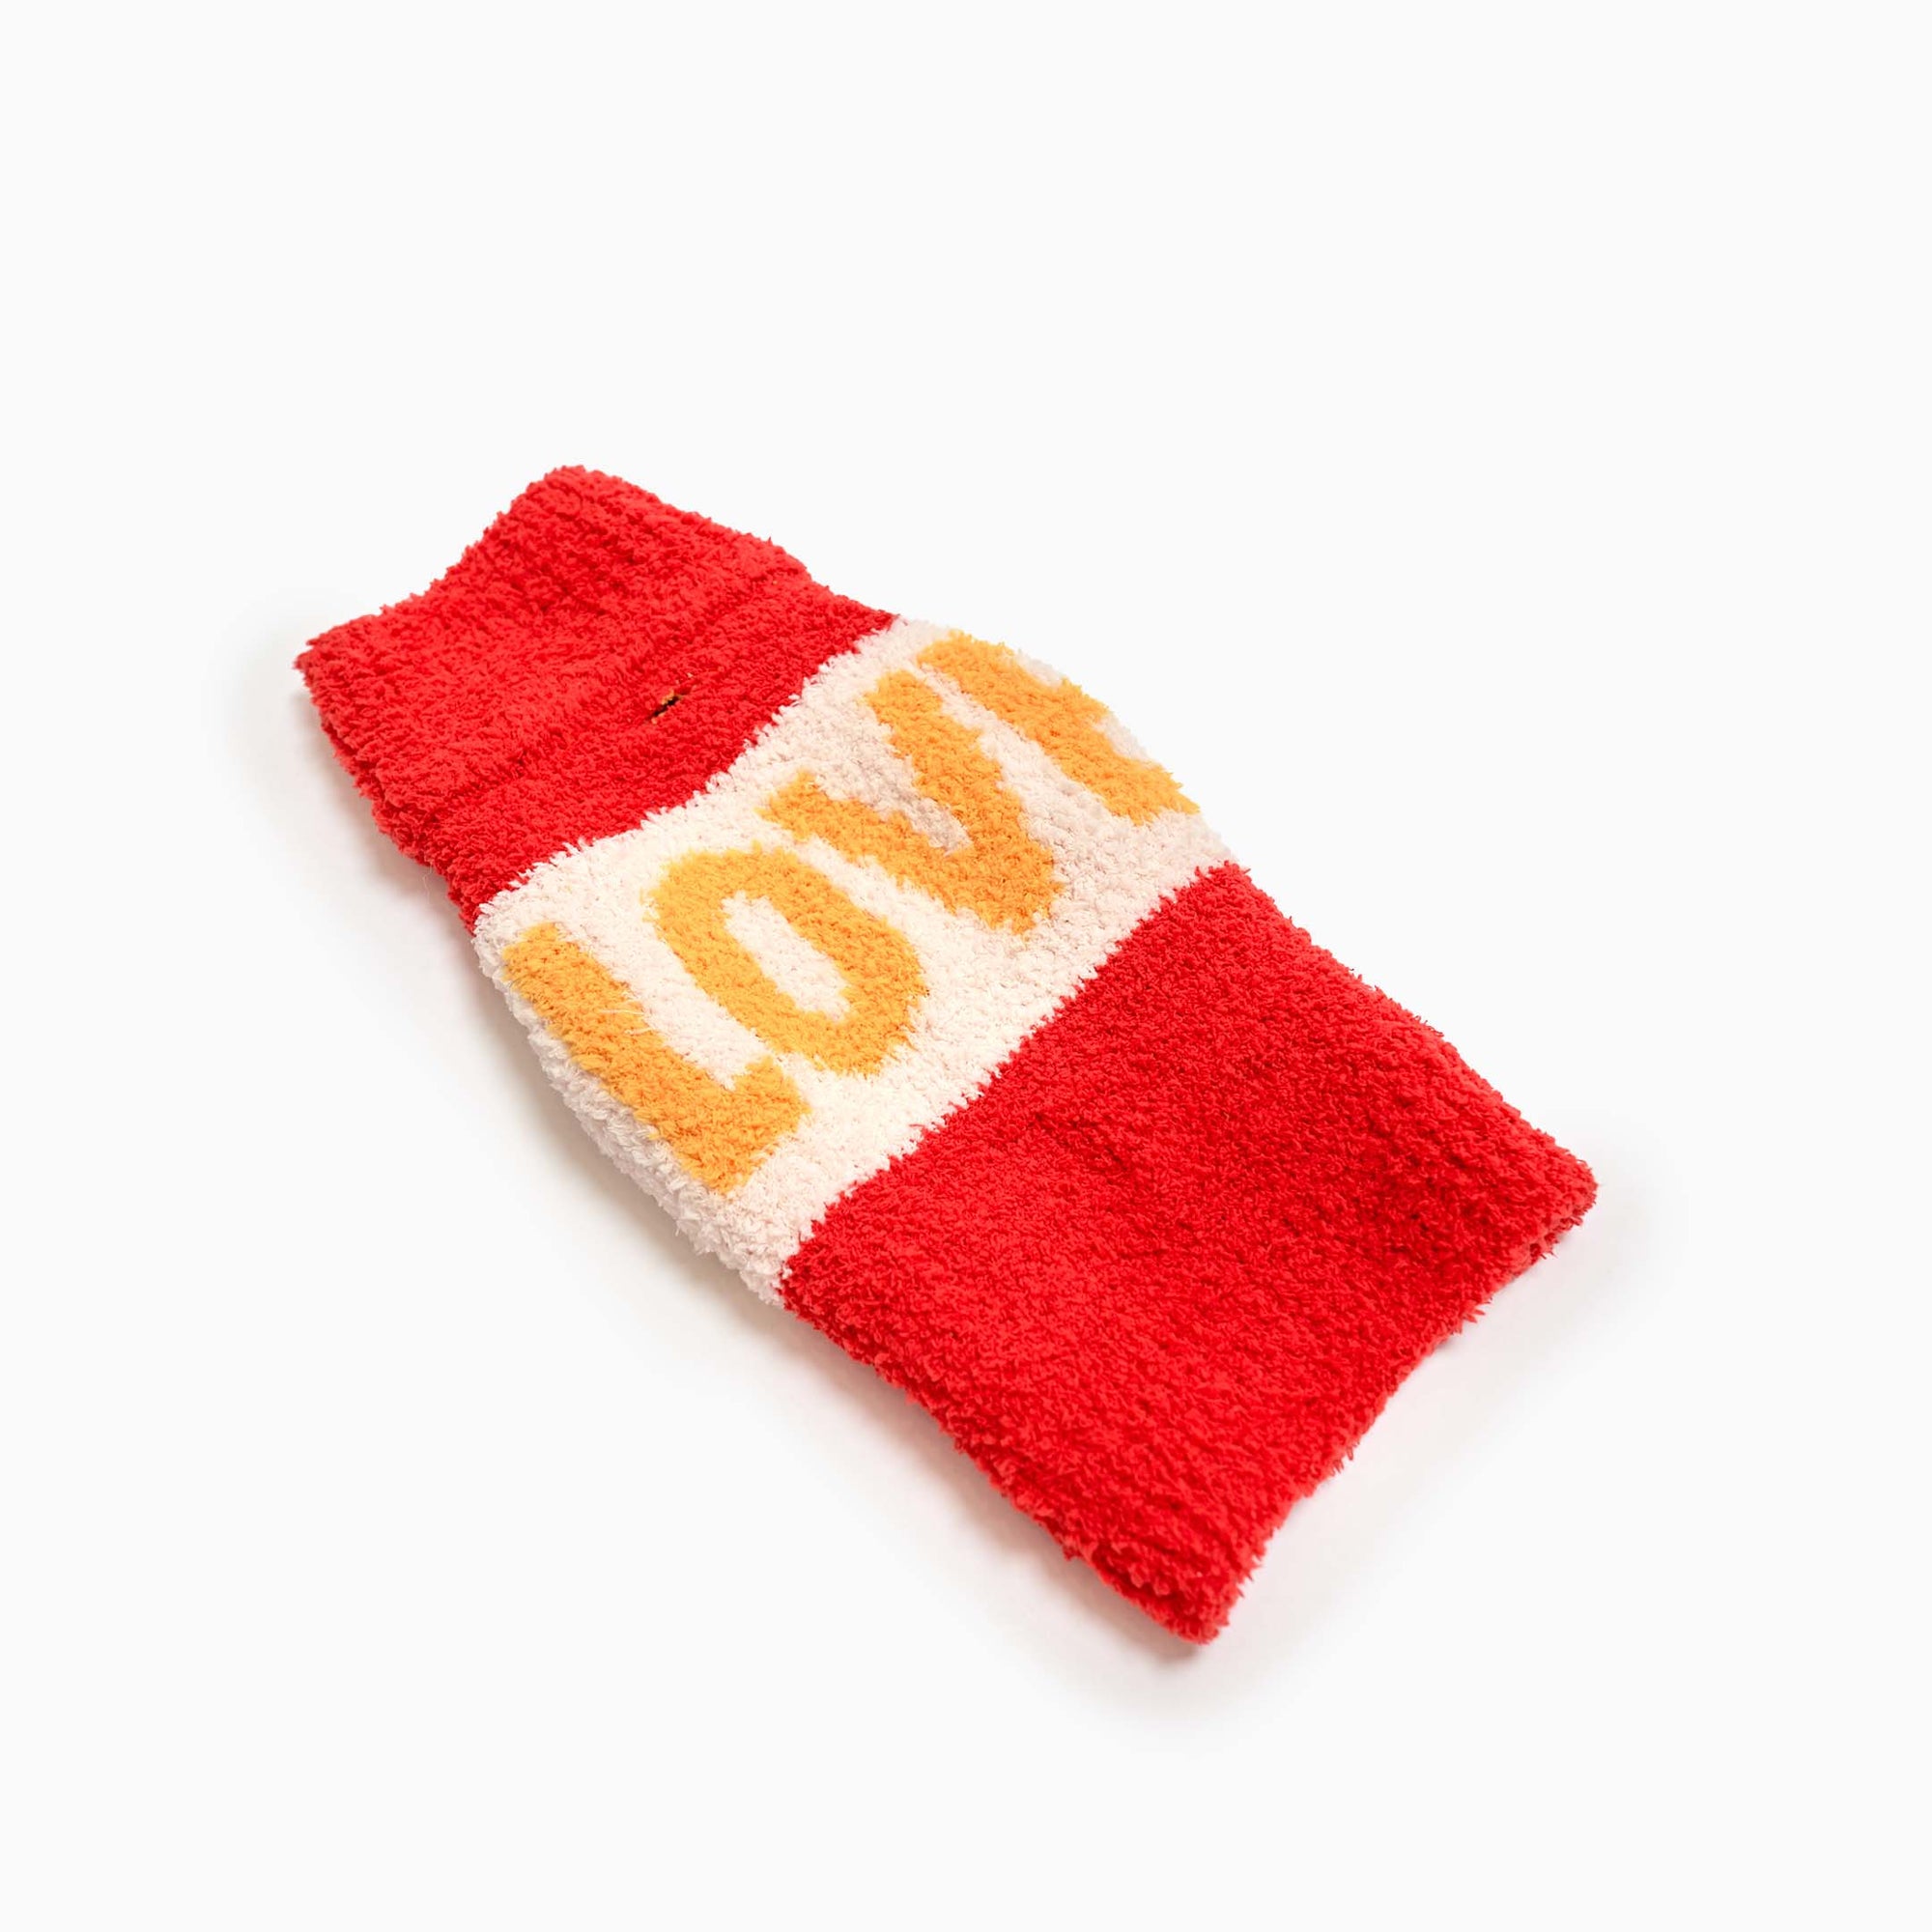  A red and white 'Love' dog sweater from The Furryfolks collection, displayed flat. The word "LOVE" is prominently featured in white on a red background.